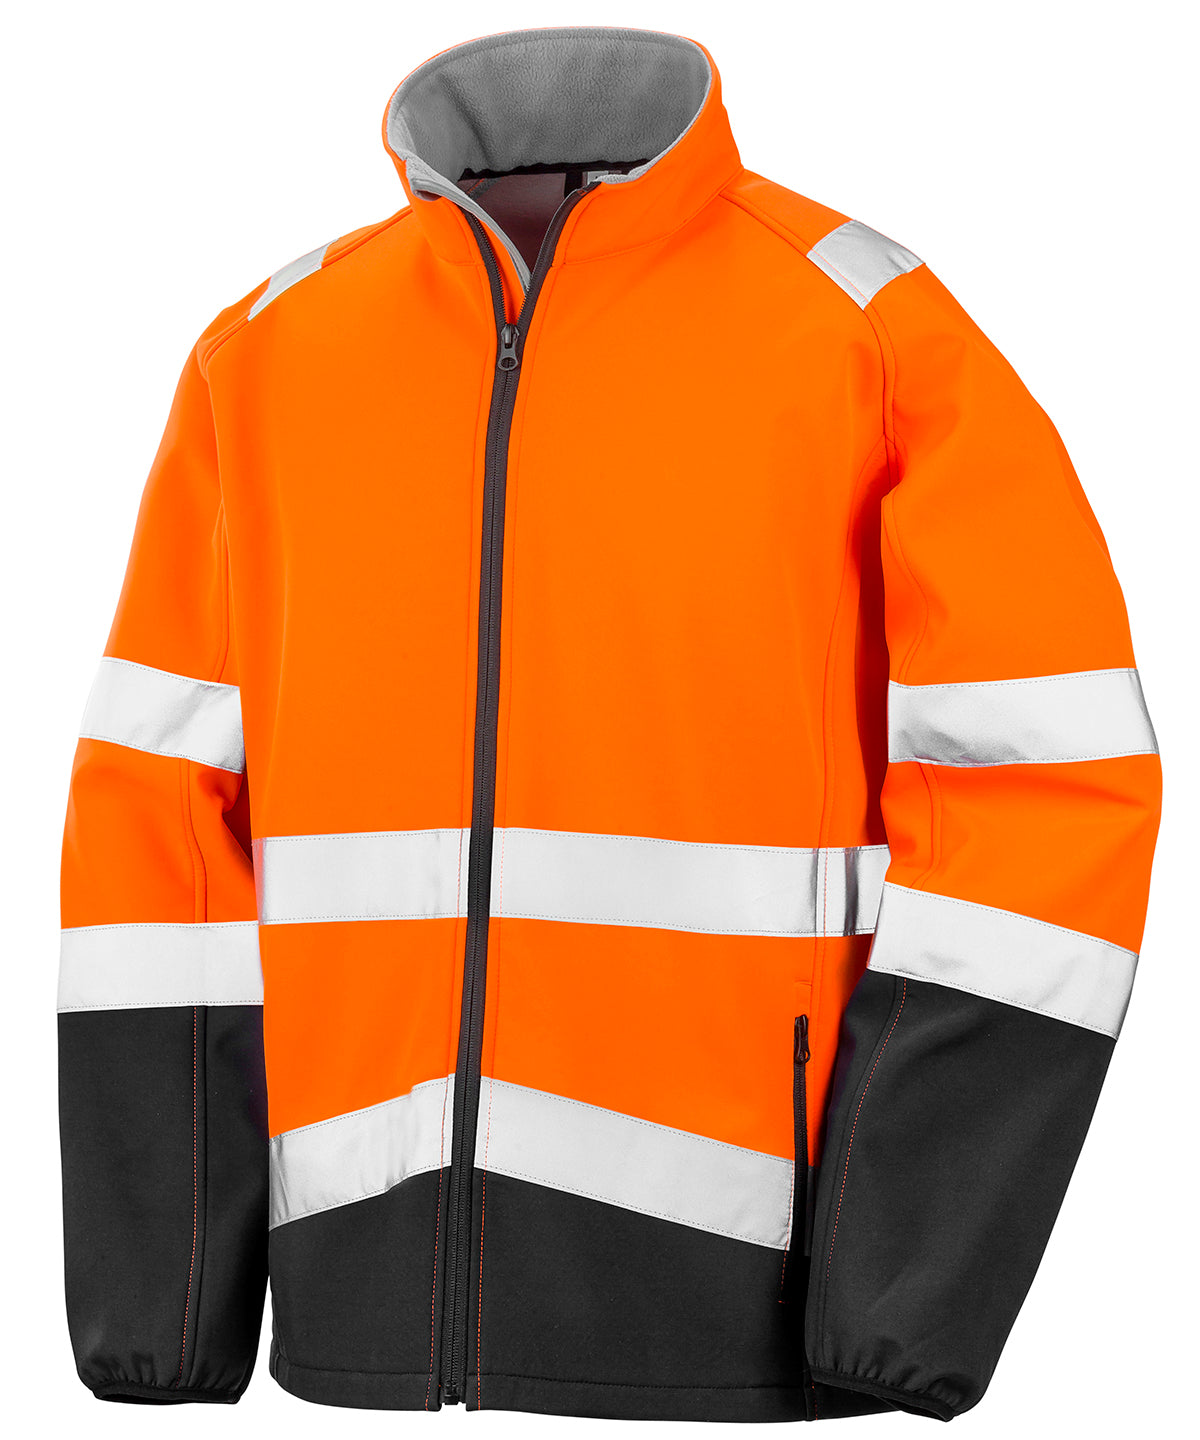 His Vis Softshell Safety Jacket